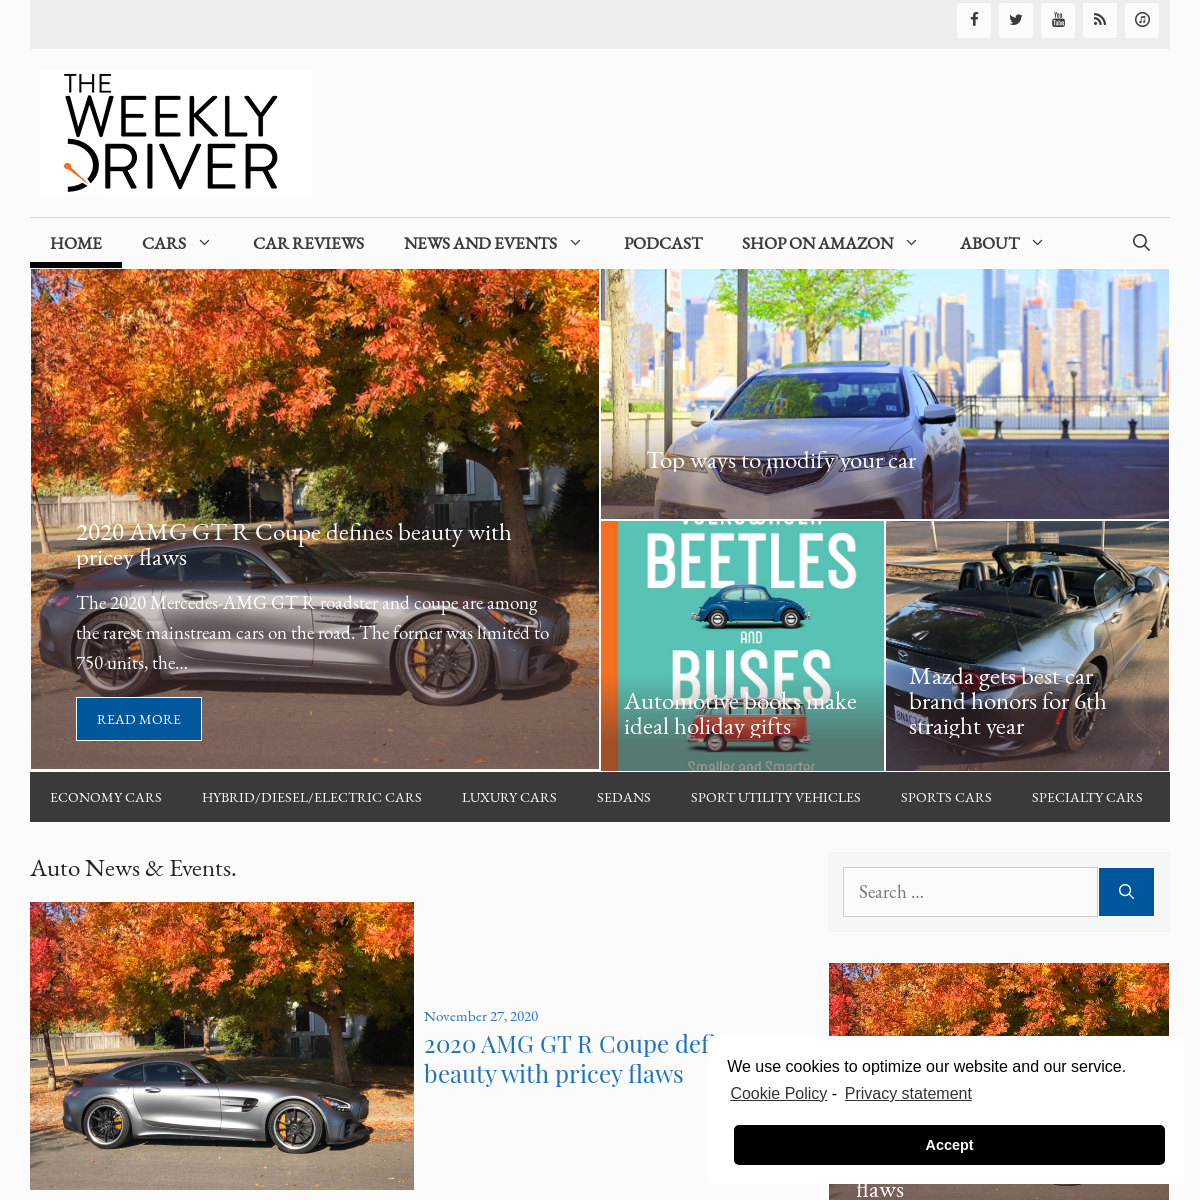 A complete backup of theweeklydriver.com